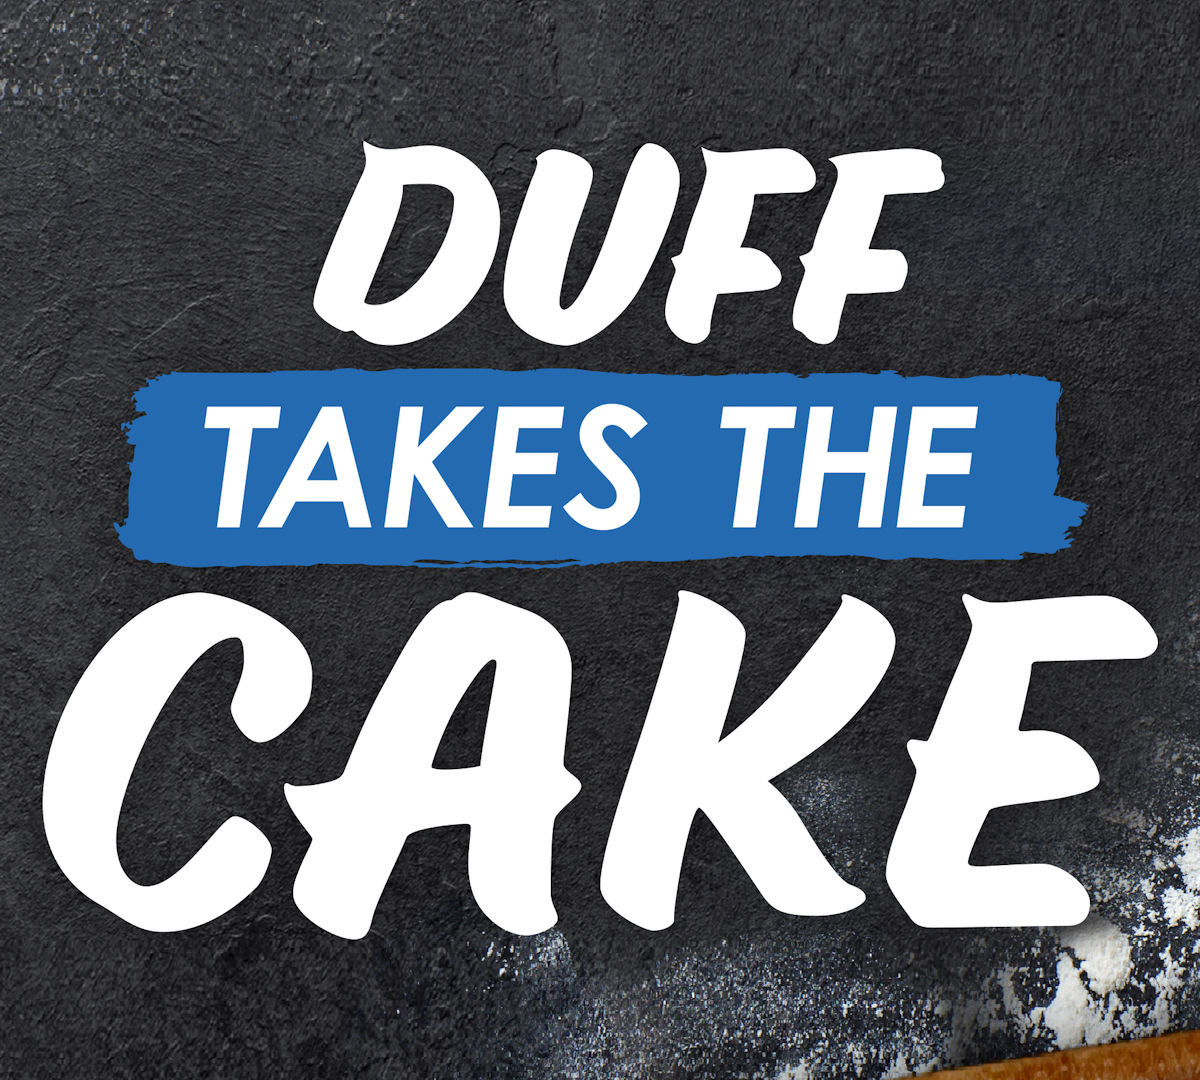 Show Duff Takes the Cake